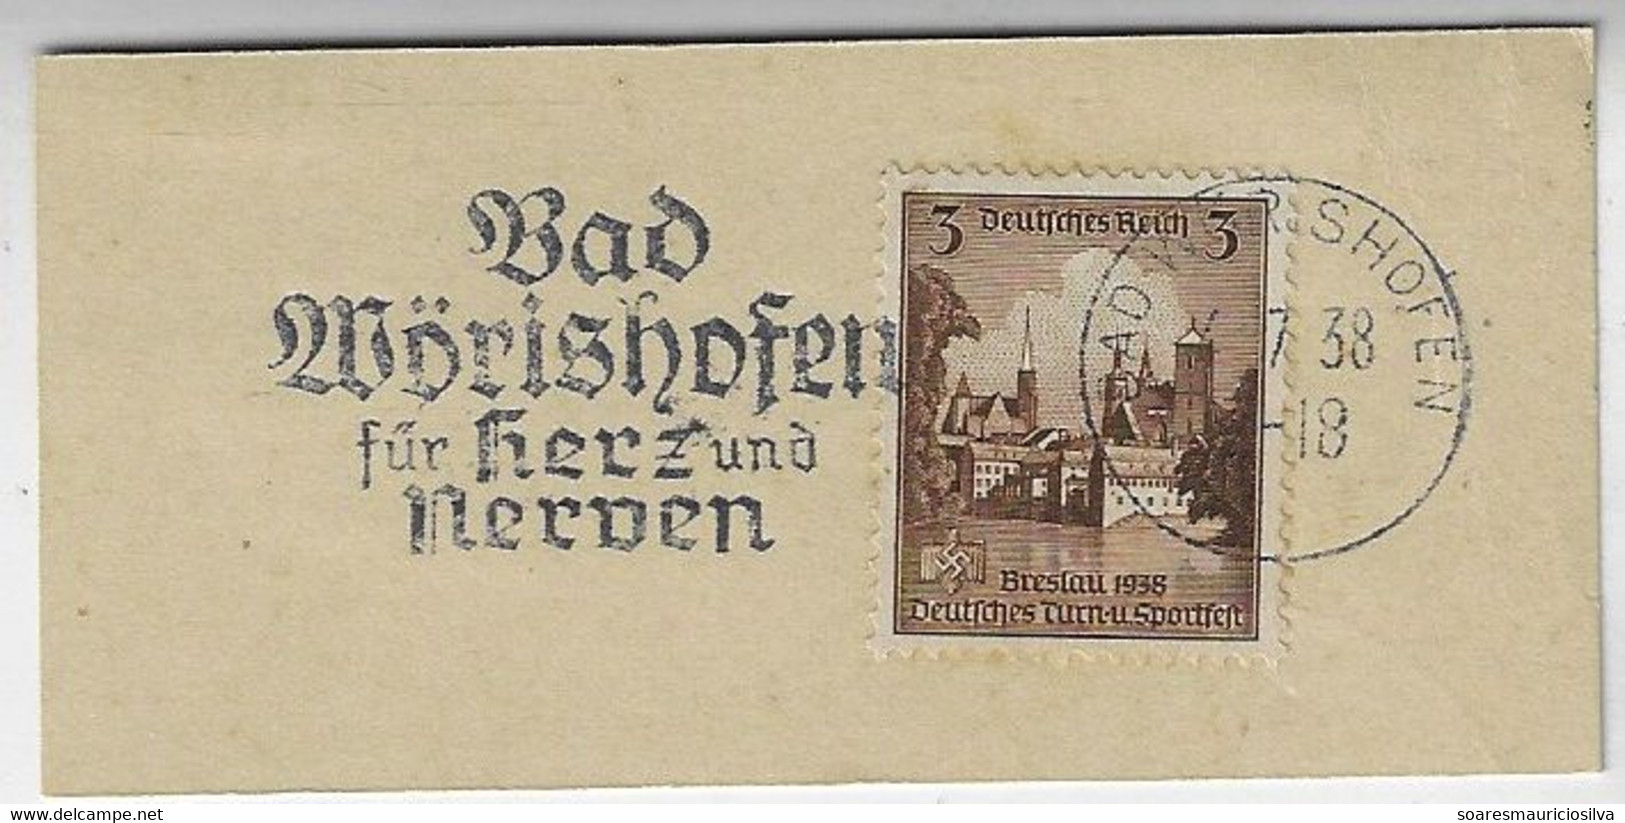 Germany 1938 Fragment Stamp Breslau 3 Pf Slogan Cancel "Bad Wörishofen for Heart And Nerves" Hydrotherapy Health - Hydrotherapy